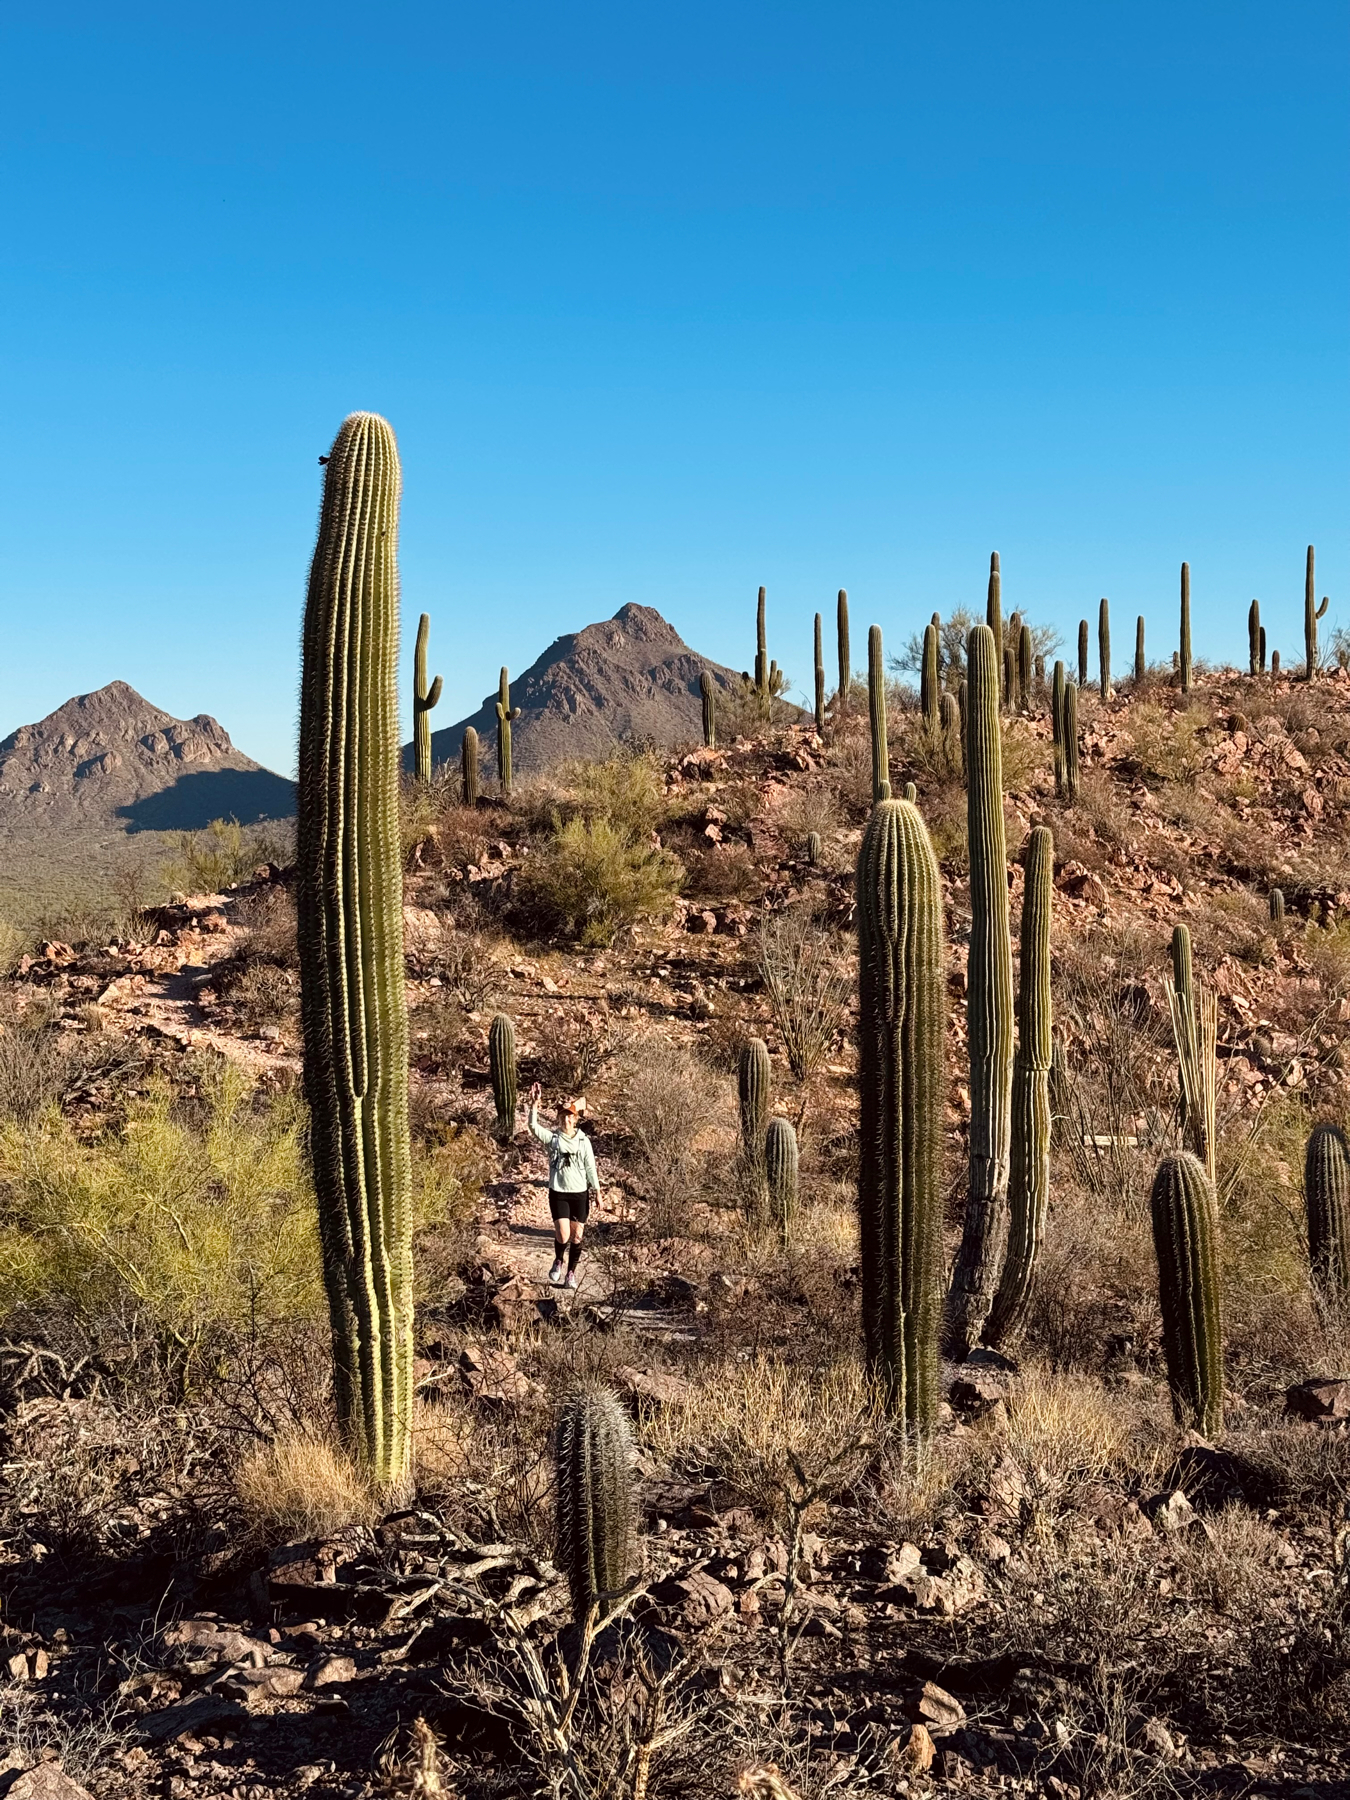 A hiker waving in the distance among tall cacti on a desert trail with mountains in the background under a clear blue sky.